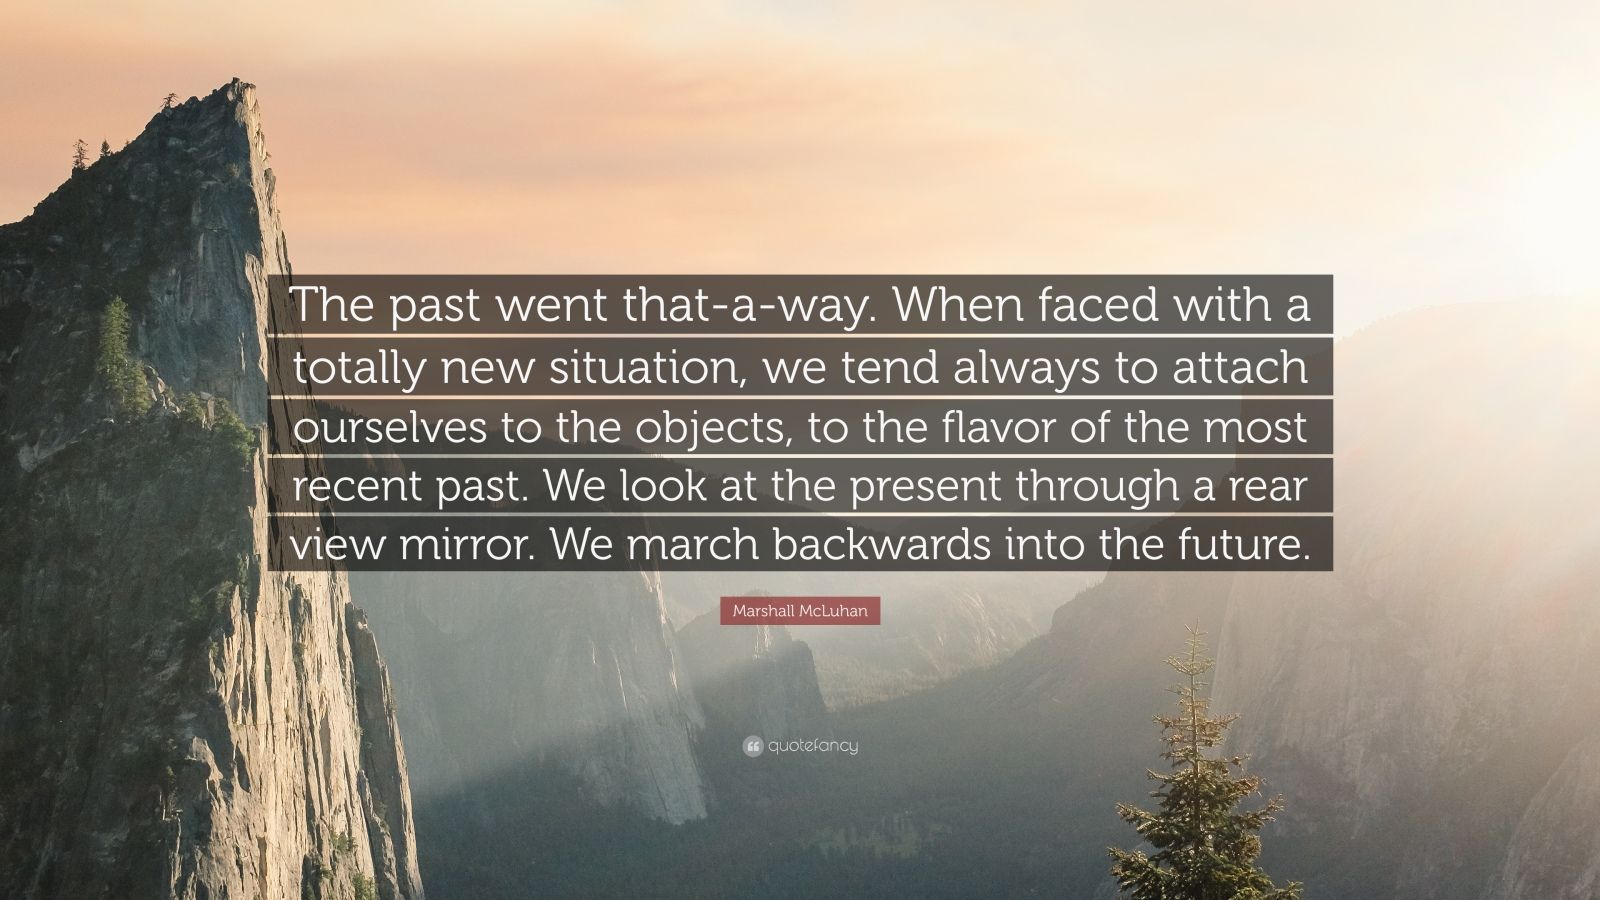 Marshall McLuhan Quote: “The past went that-a-way. When faced